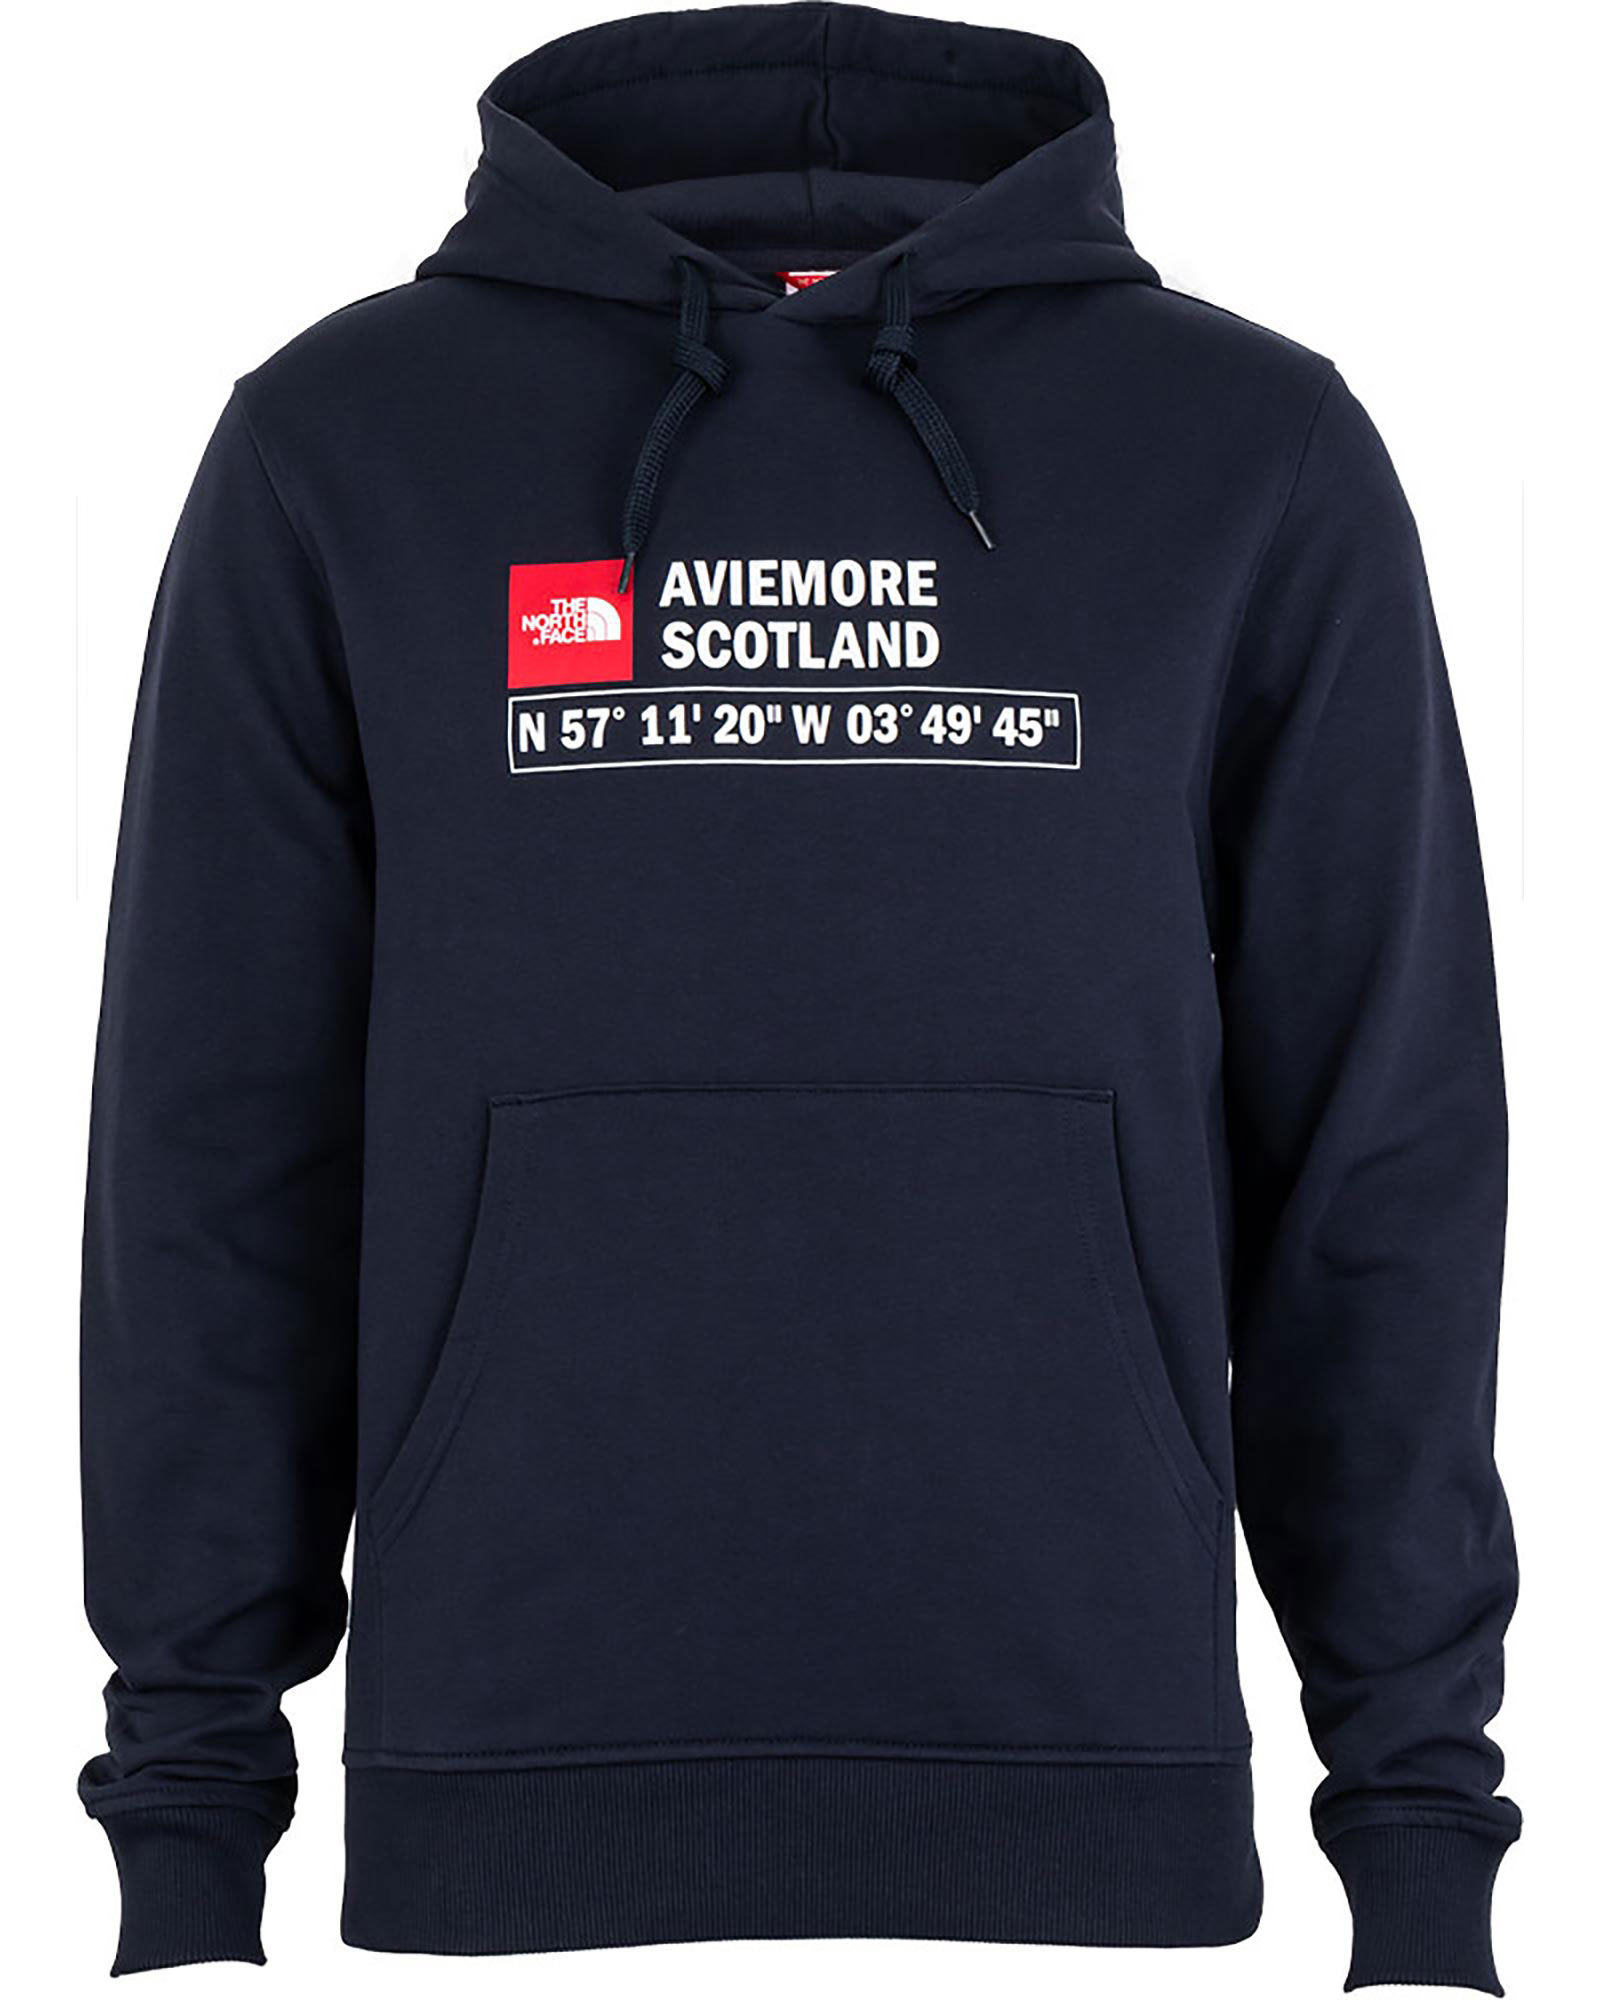 The North Face Gps Mens Hoodie Aviemore